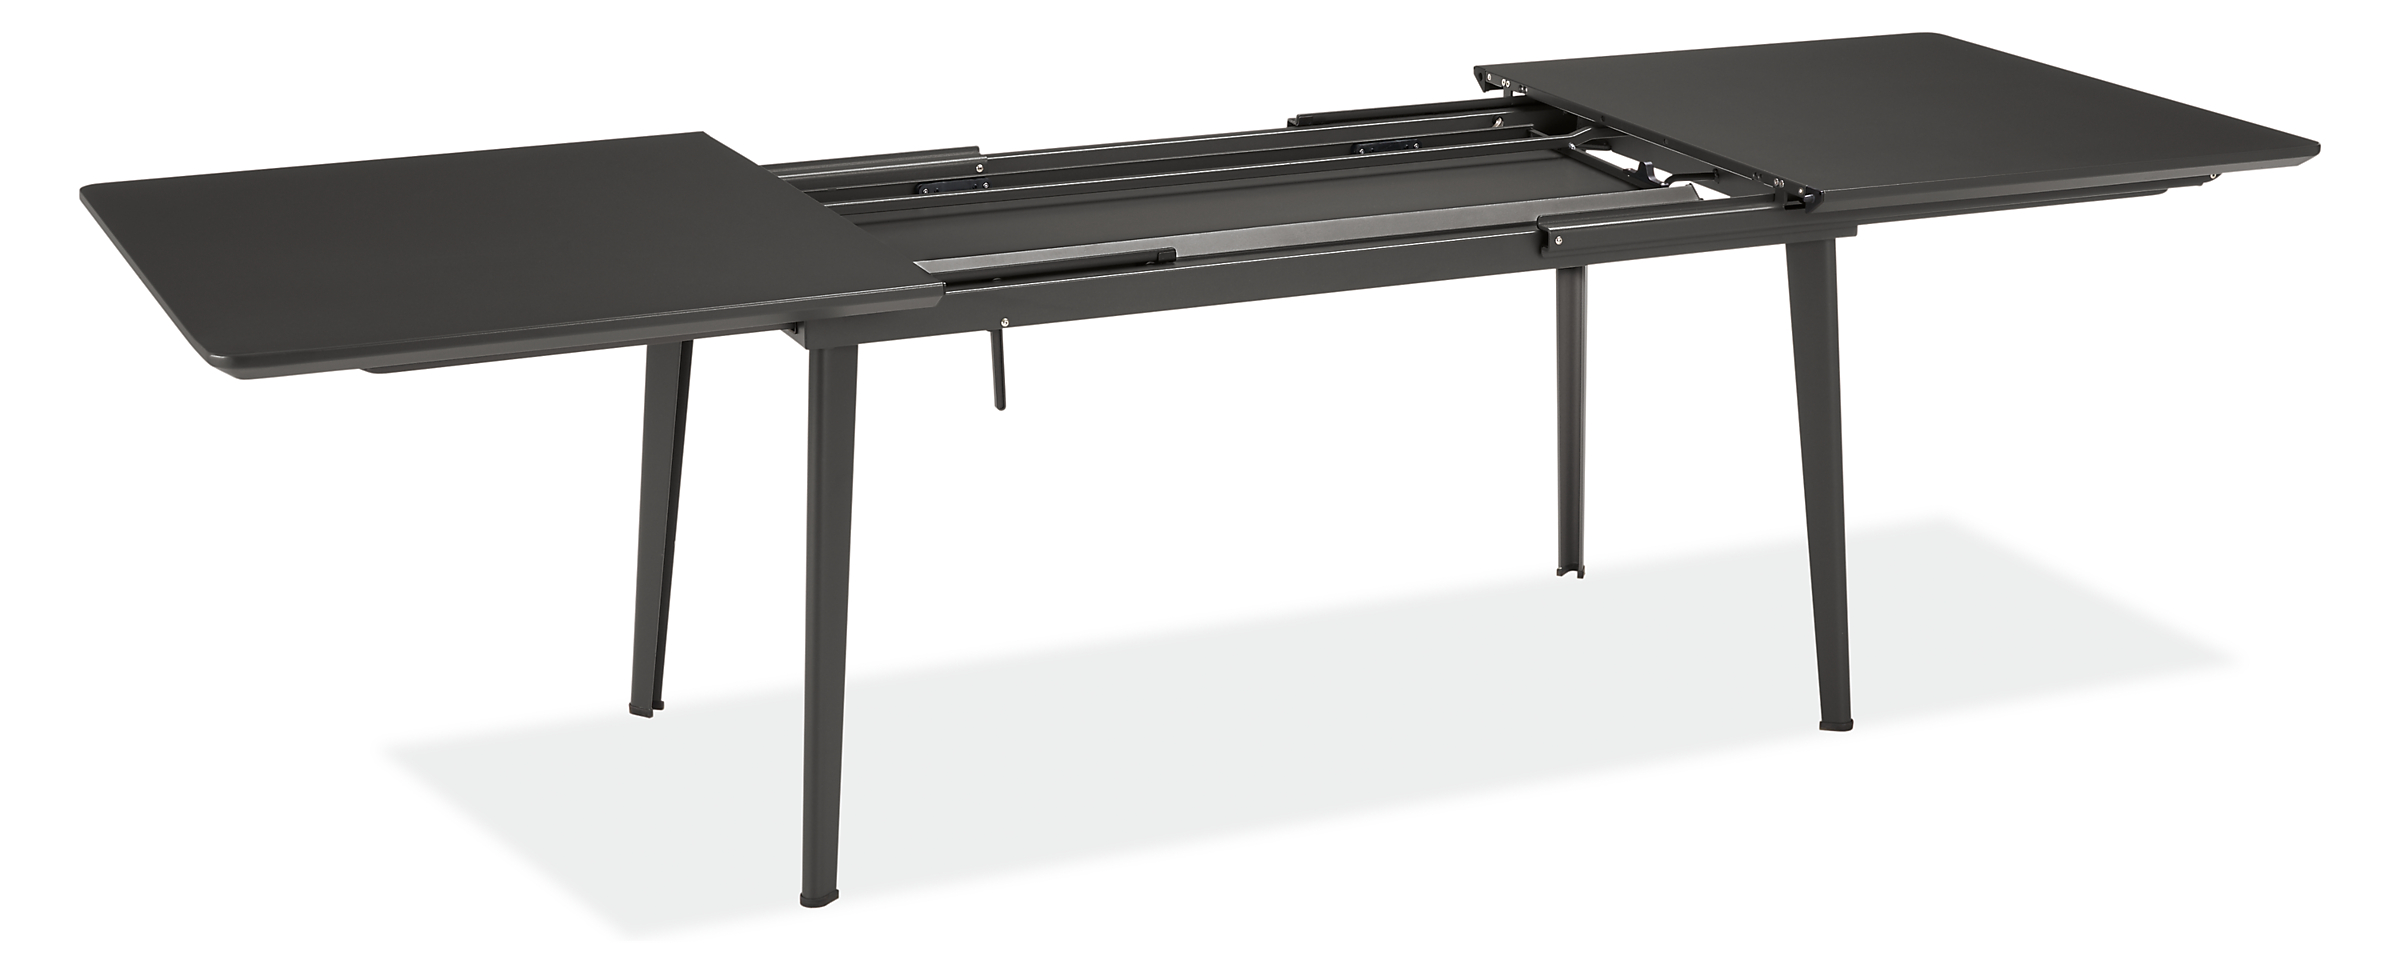 Detail of Vista 63w 36d 30h Extension Table with One 44" Leaf in Graphite.